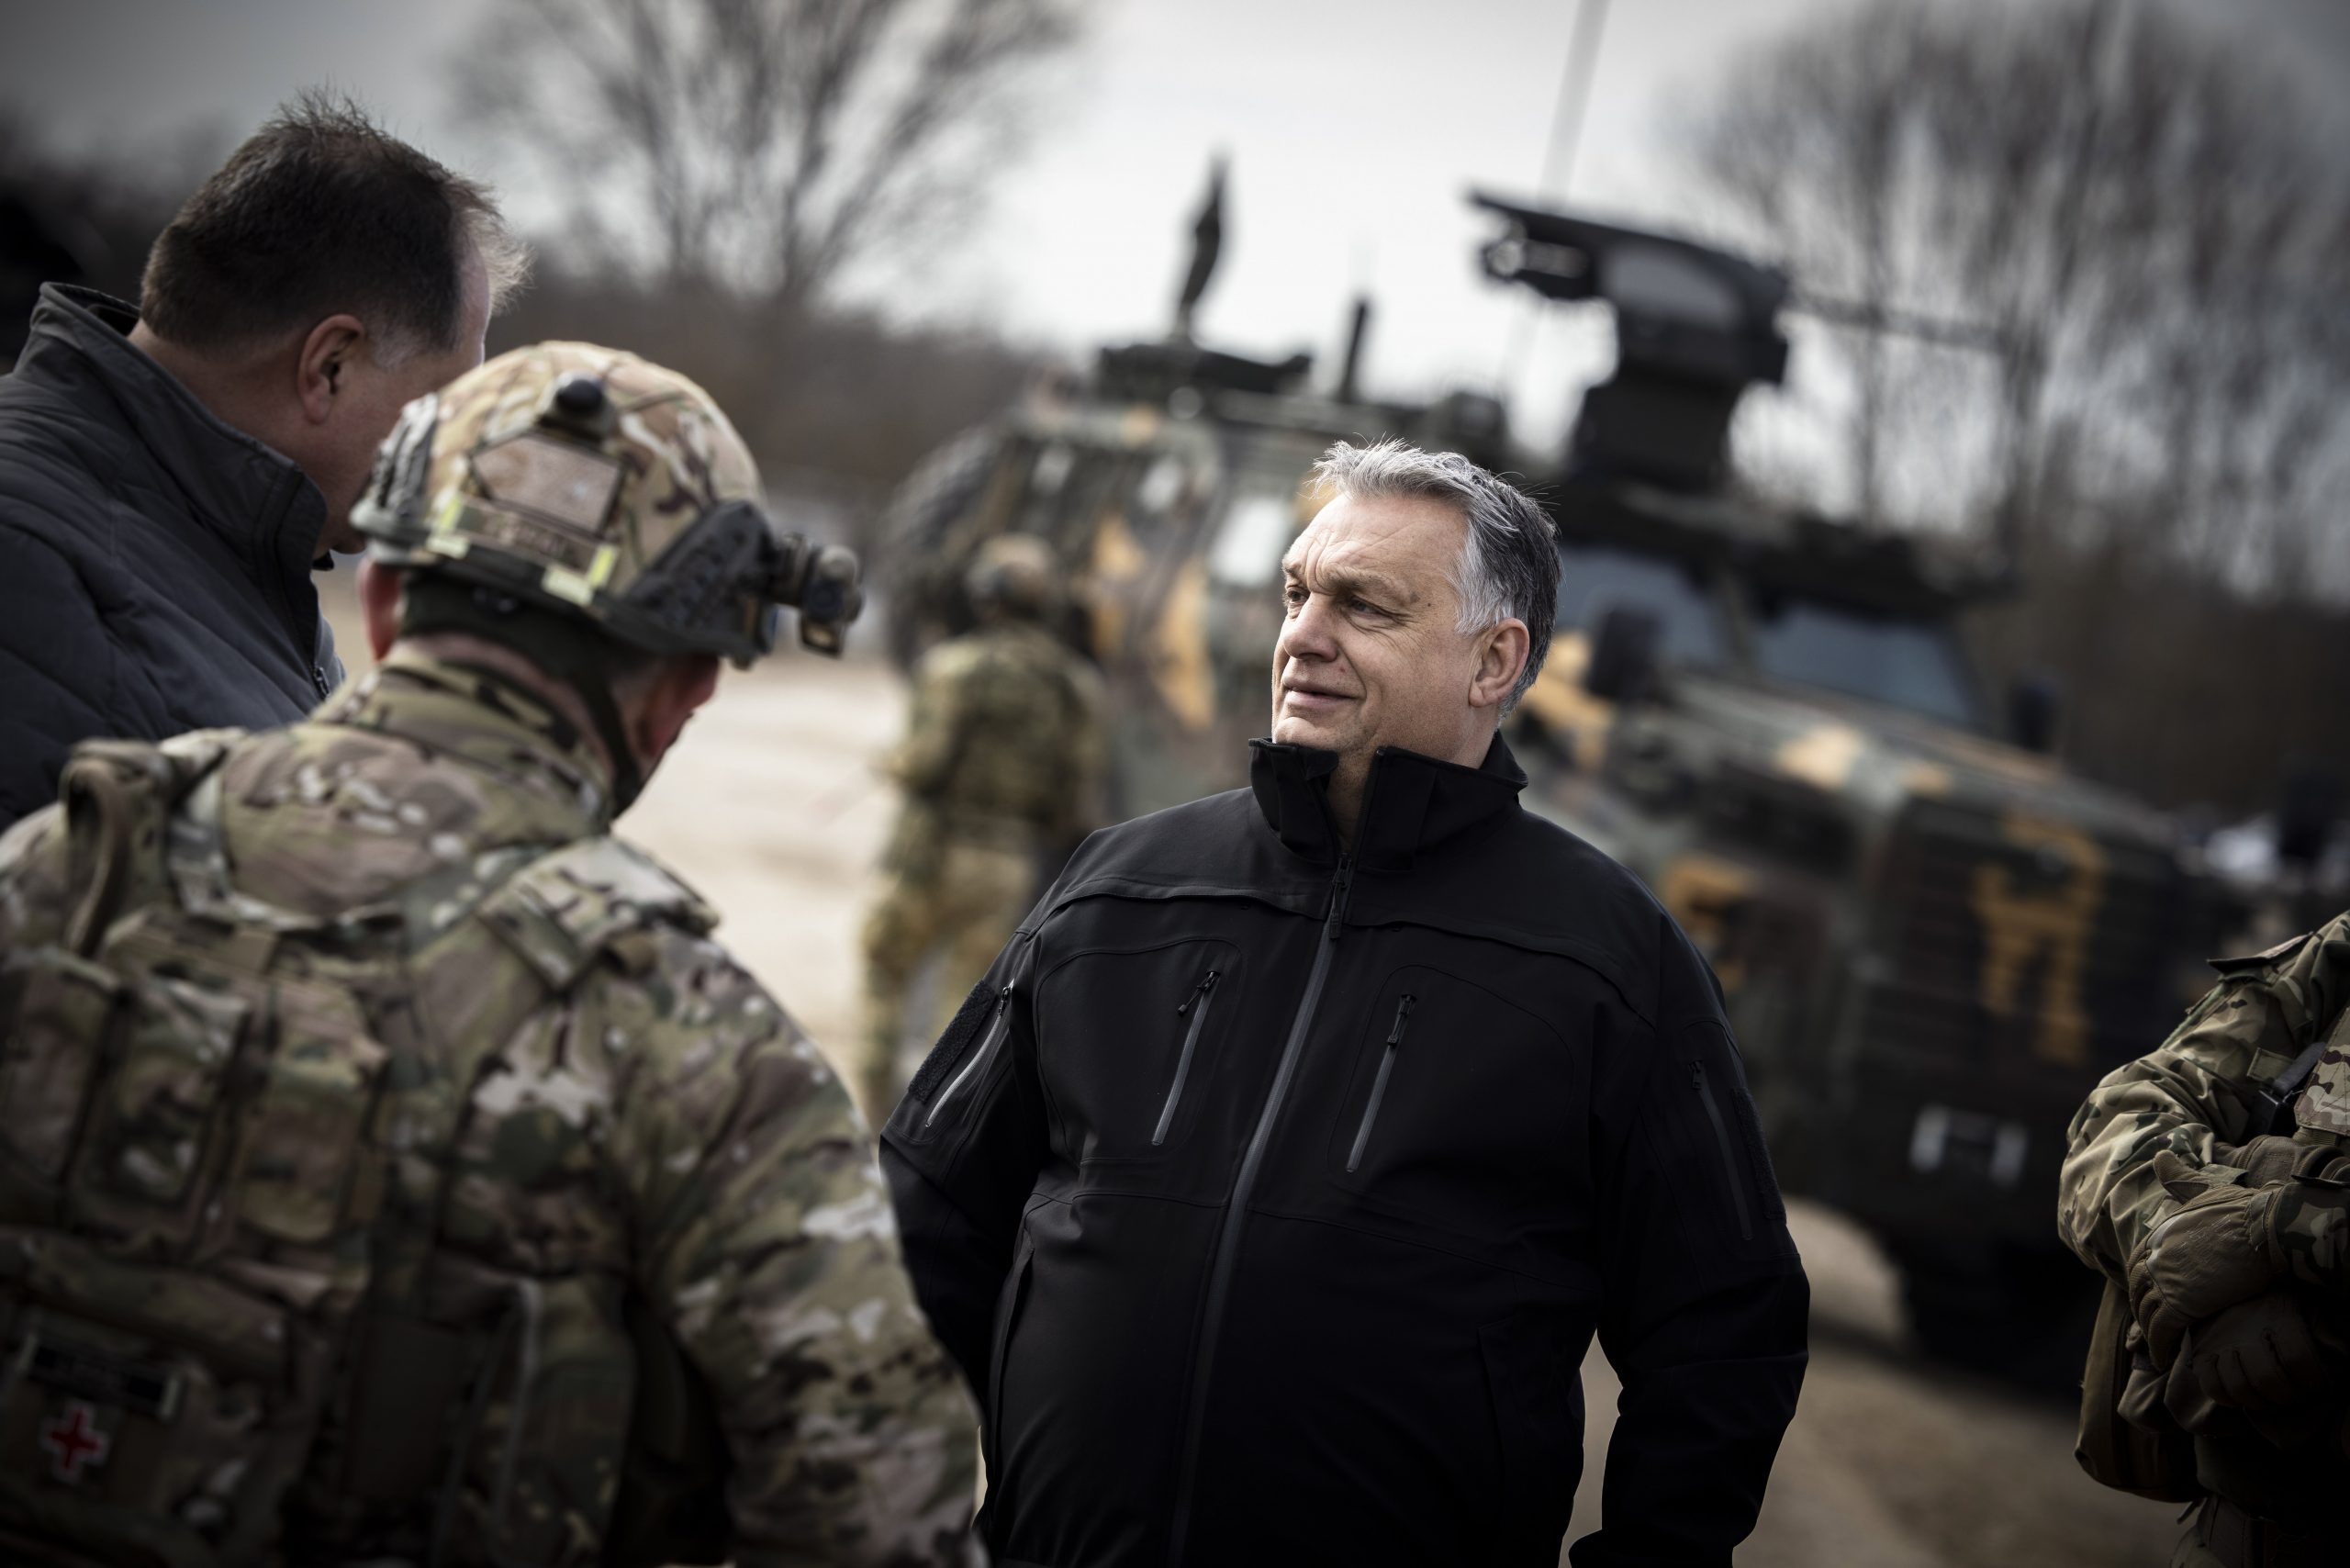 PM Orbán: “We are in the crossfire of major geopolitical players”